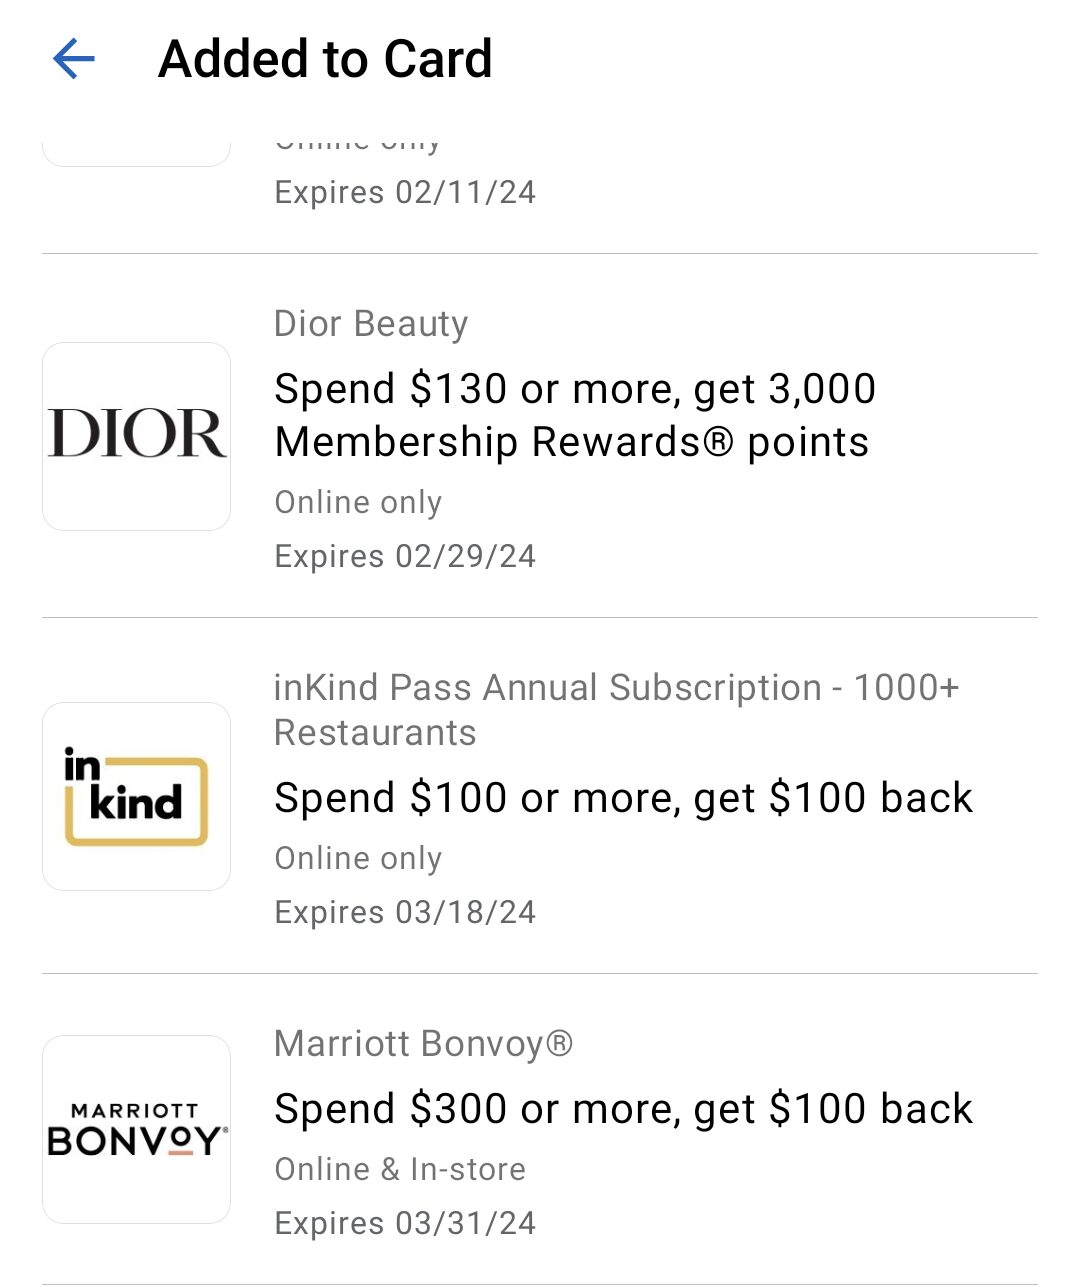 Available Amex Offers in the app